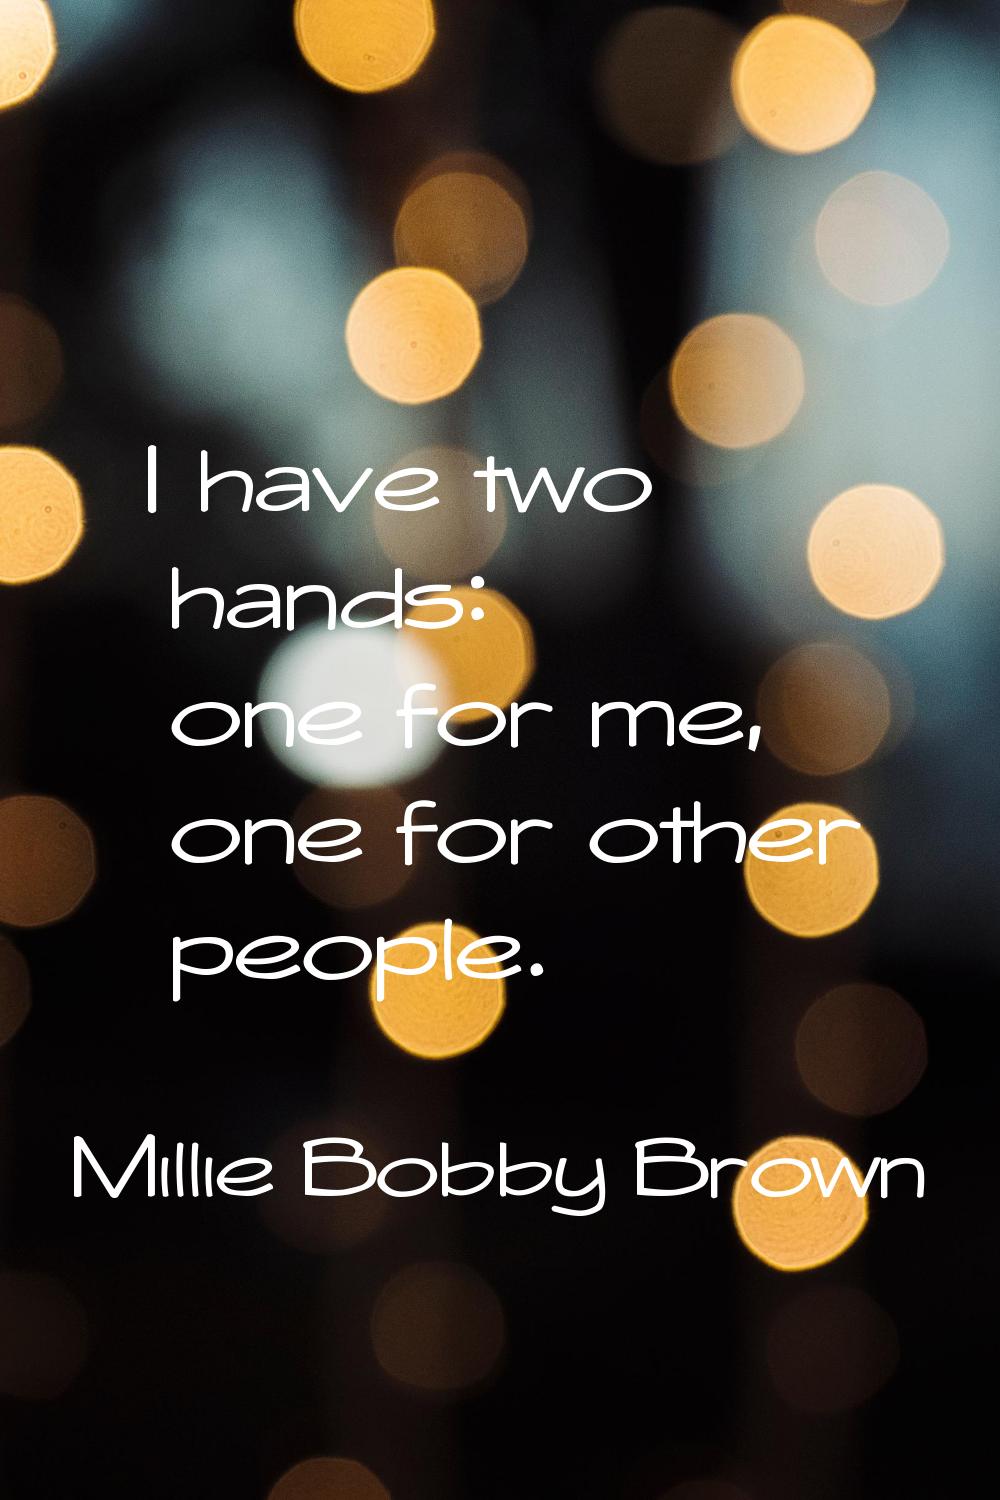 I have two hands: one for me, one for other people.